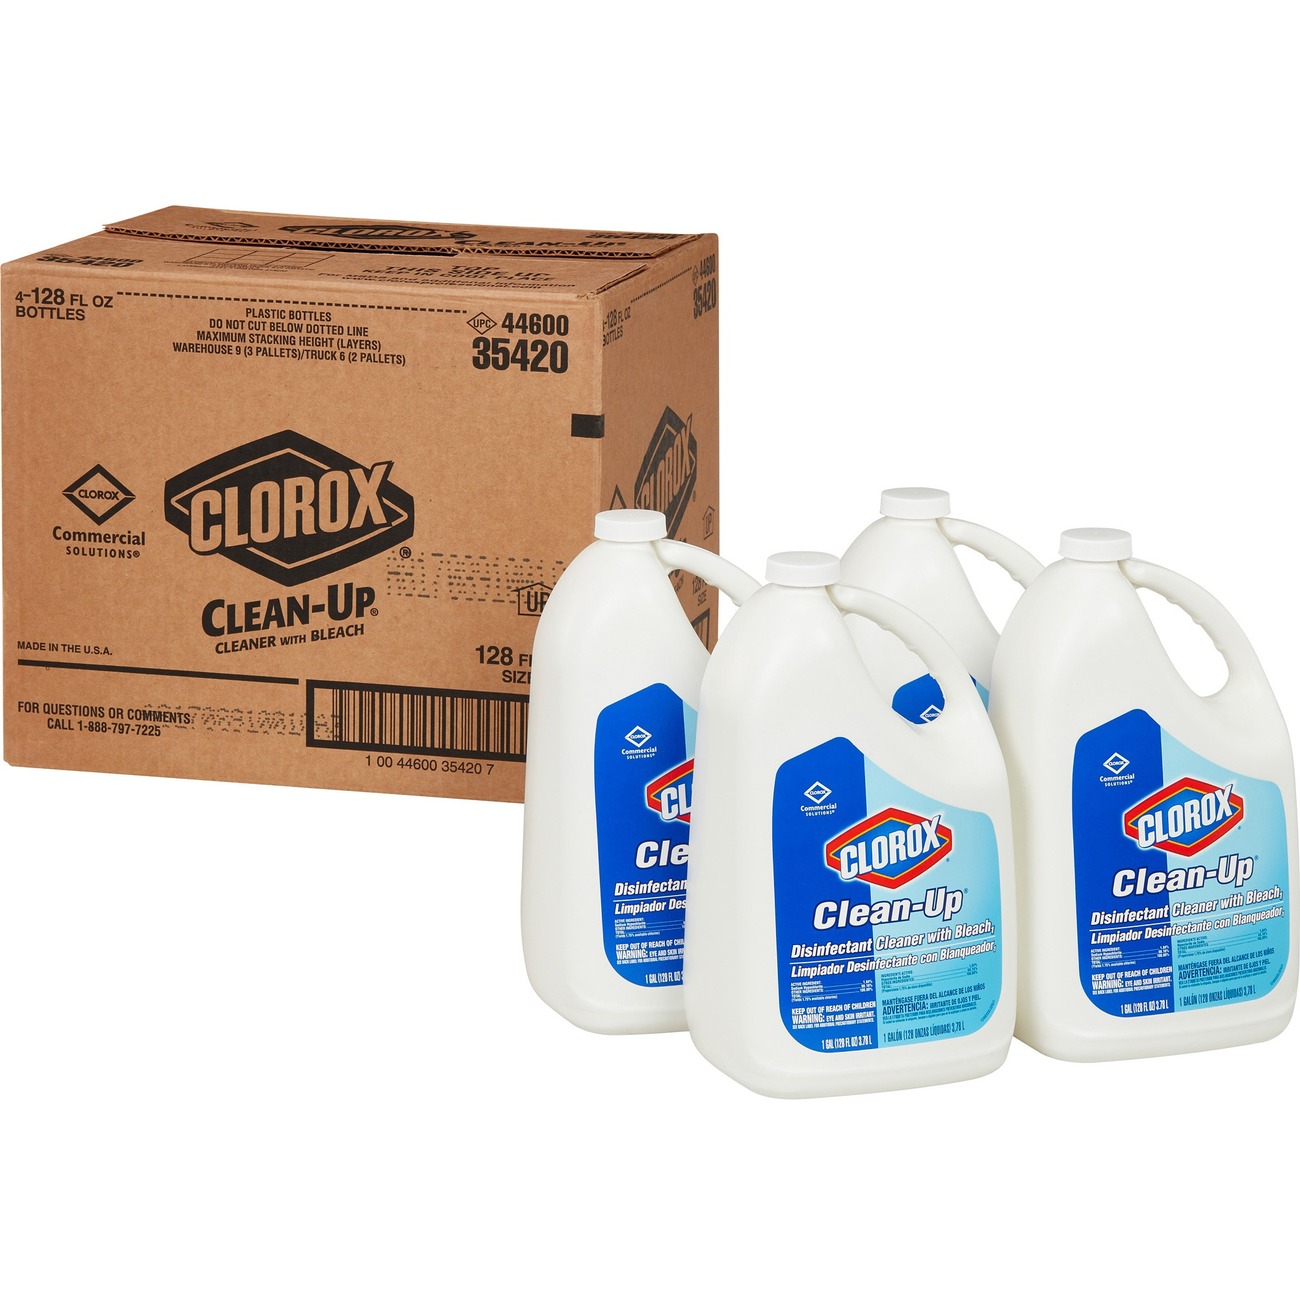 CLOROX CLEAN-UP GALLONS
BLEACH DISINFECTANT CLEANER
4/128oz